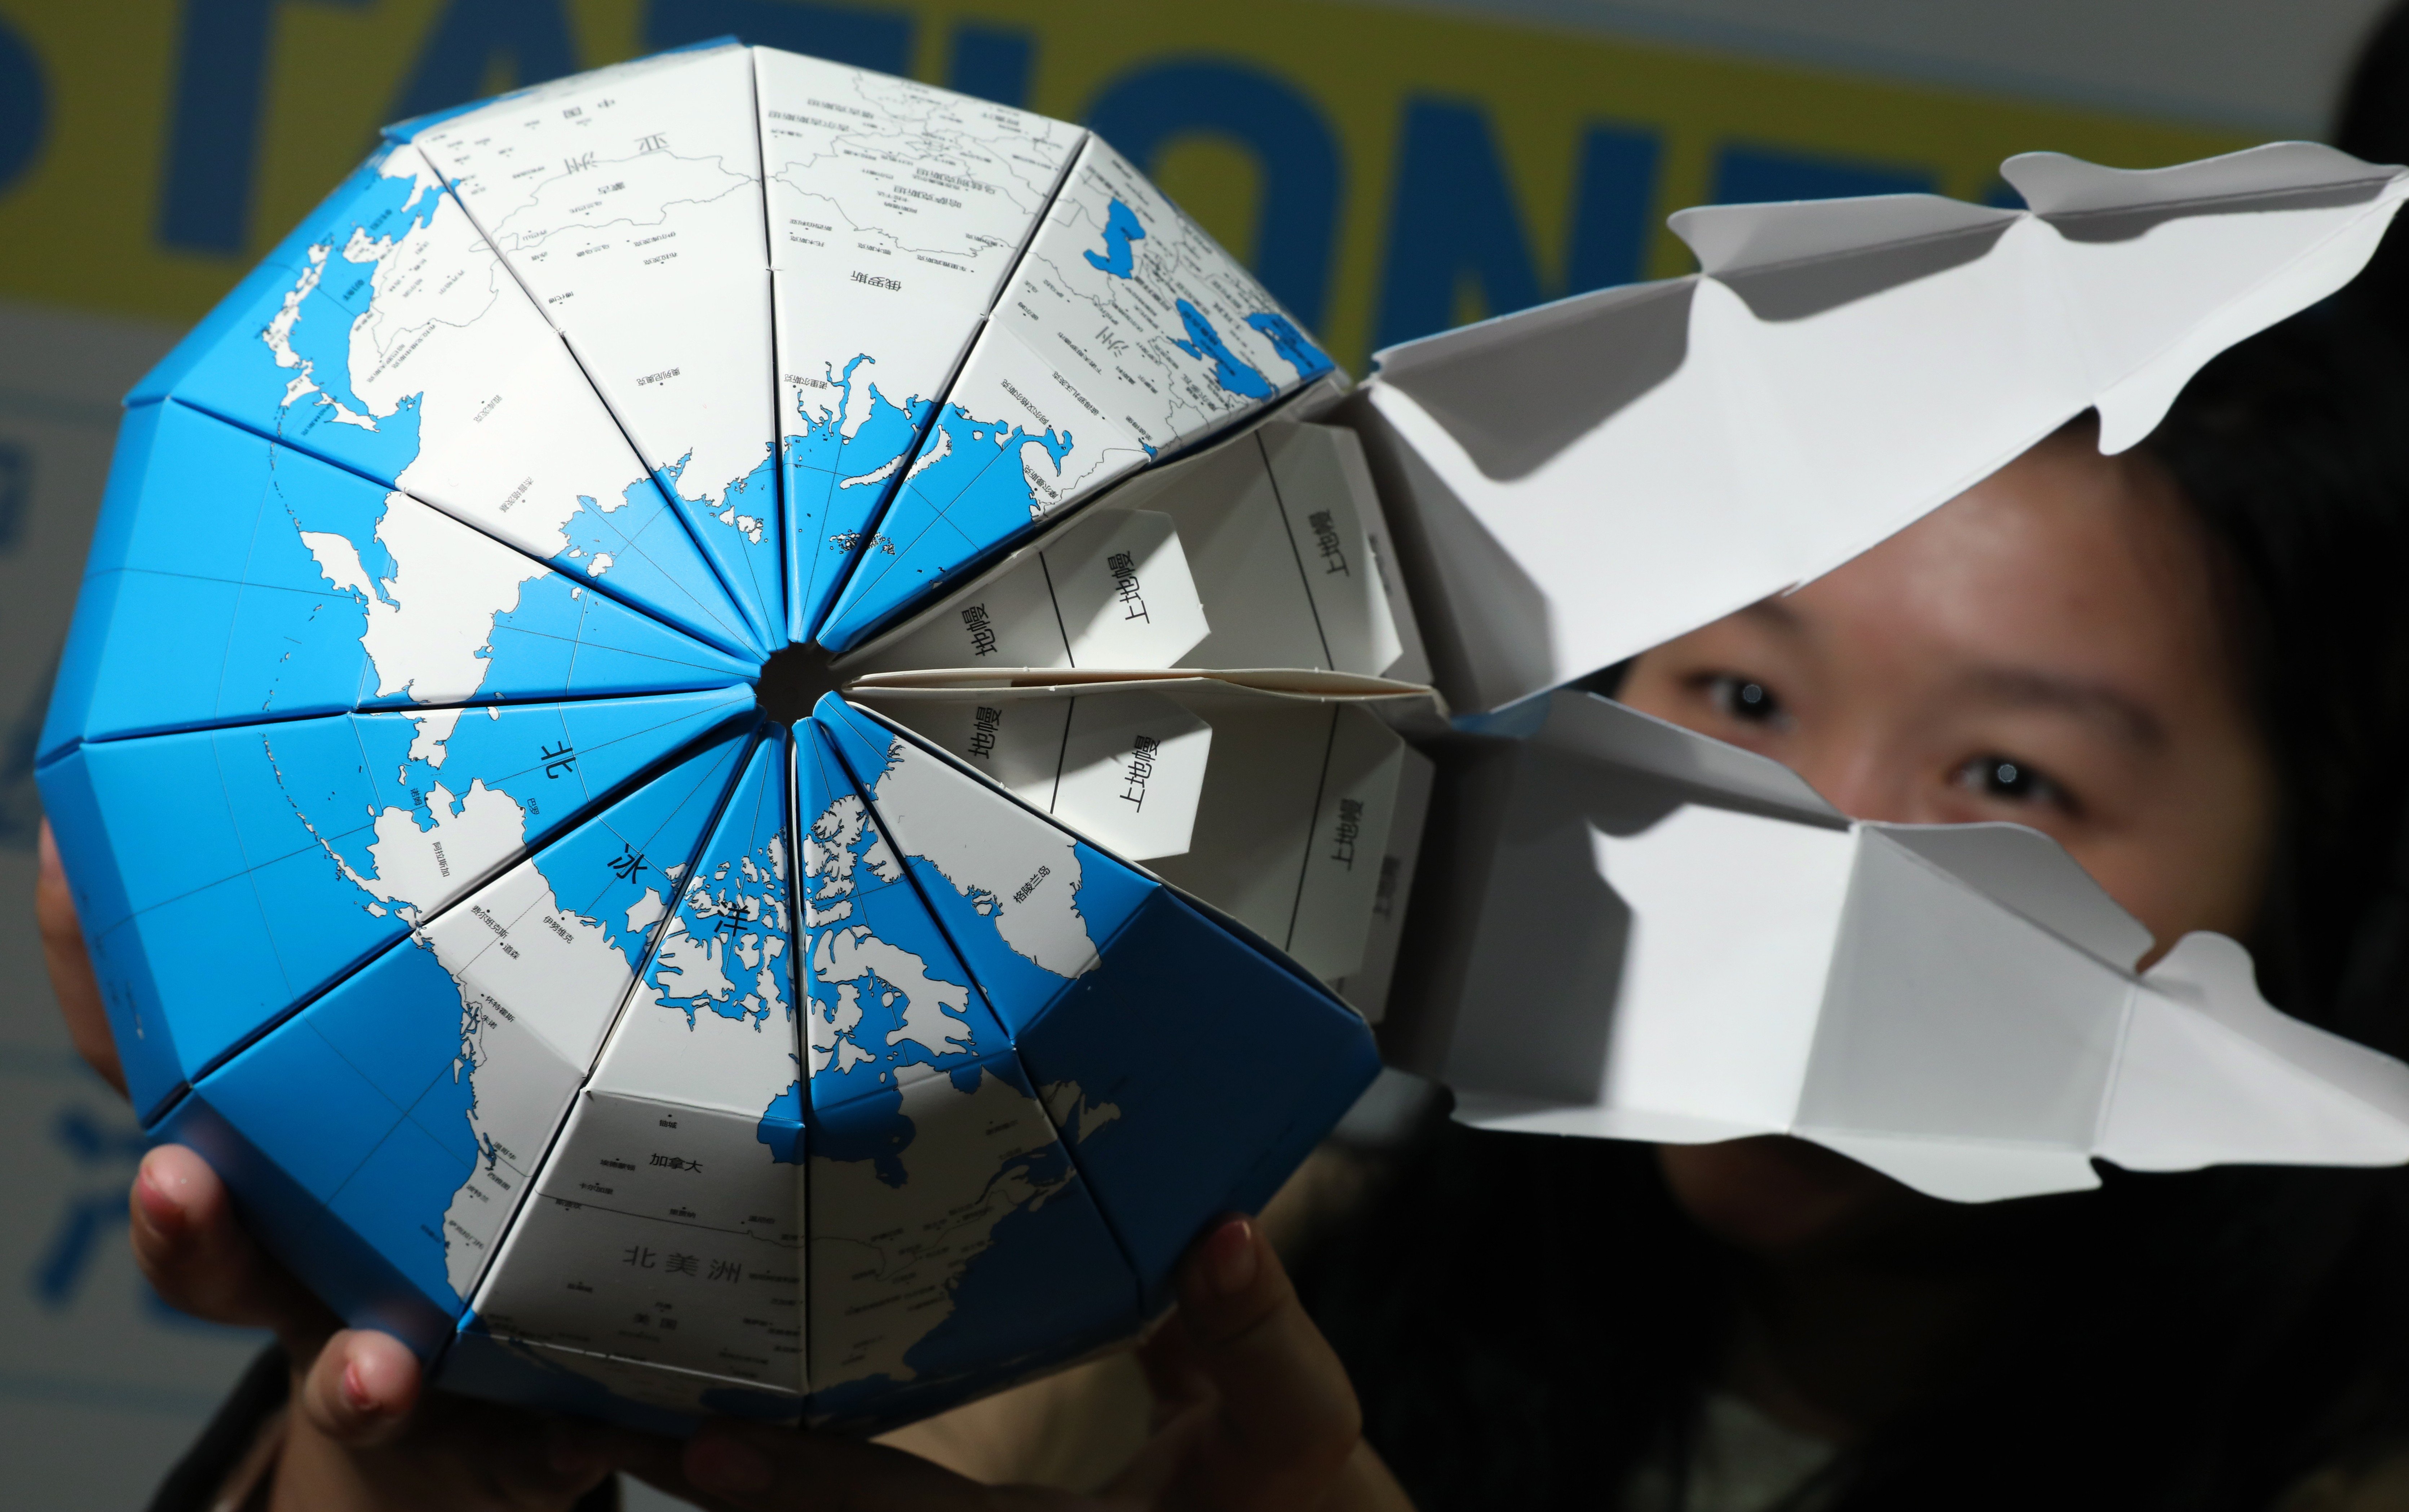 A representative of Shangdong Orange Paper Import and Export Company introduces its paper globe at a trade fair in Hong Kong in January. The “China model” of development has come under attack recently for being insufficiently open to foreign companies. Photo: Nora Tam